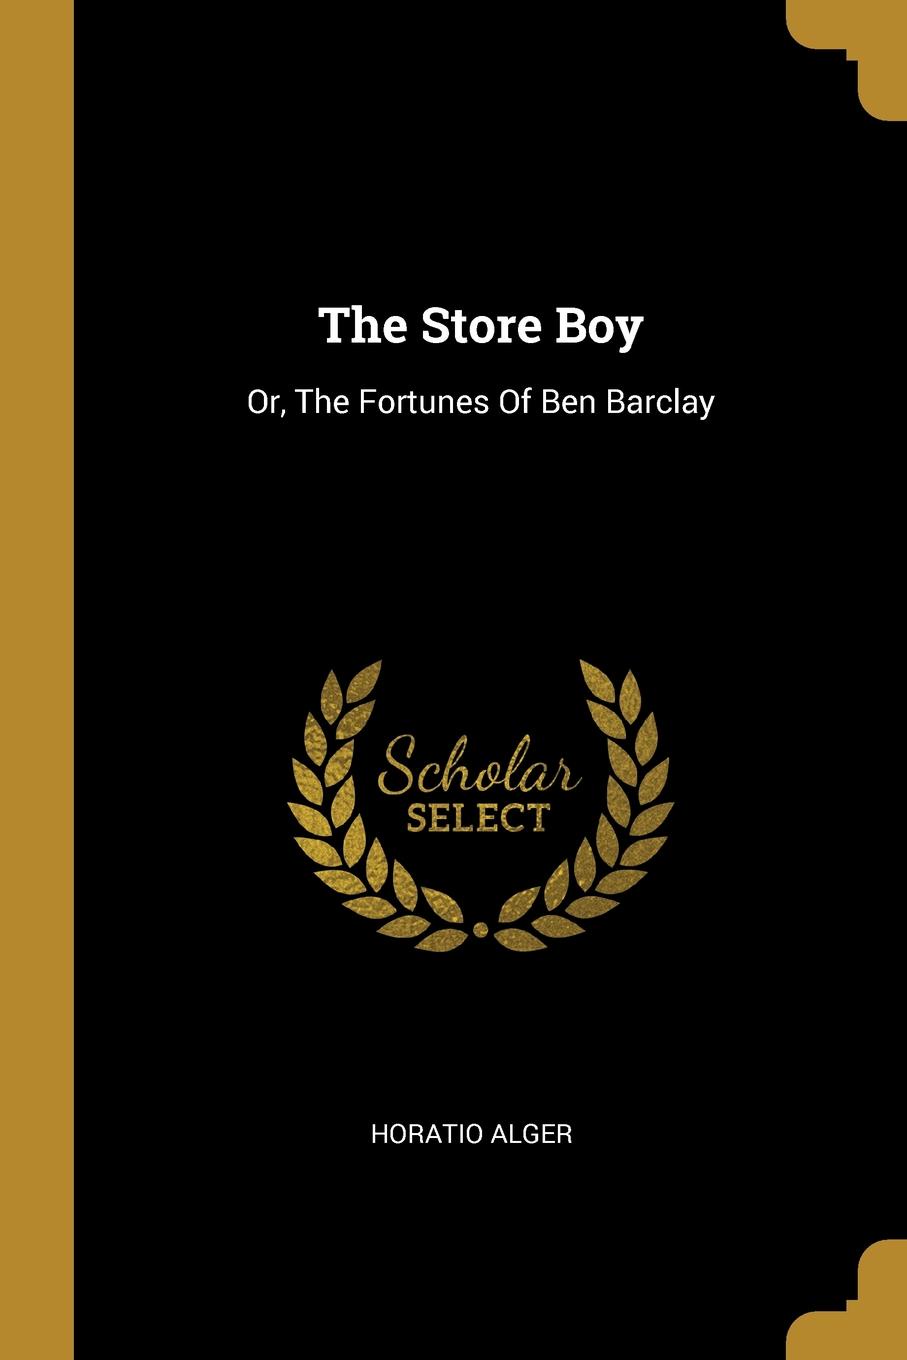 The Store Boy. Or, The Fortunes Of Ben Barclay